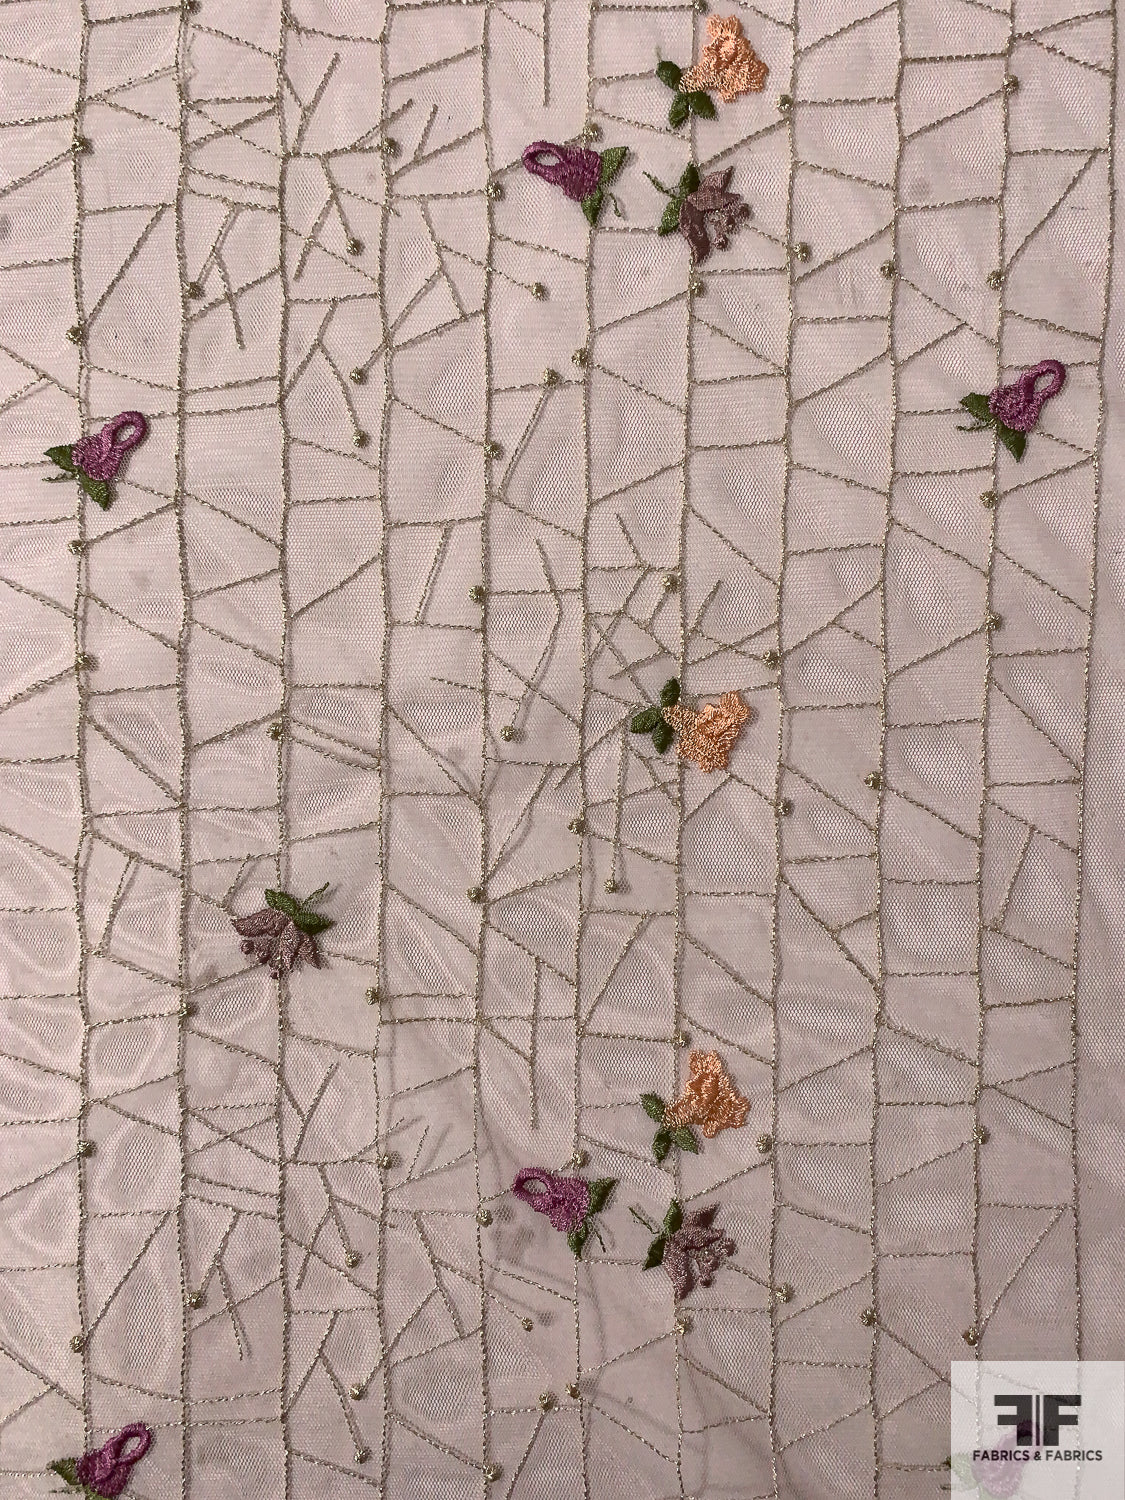 Geometric Grid and Floral Embroidered Netting - Taupe / Moss Green / Purple